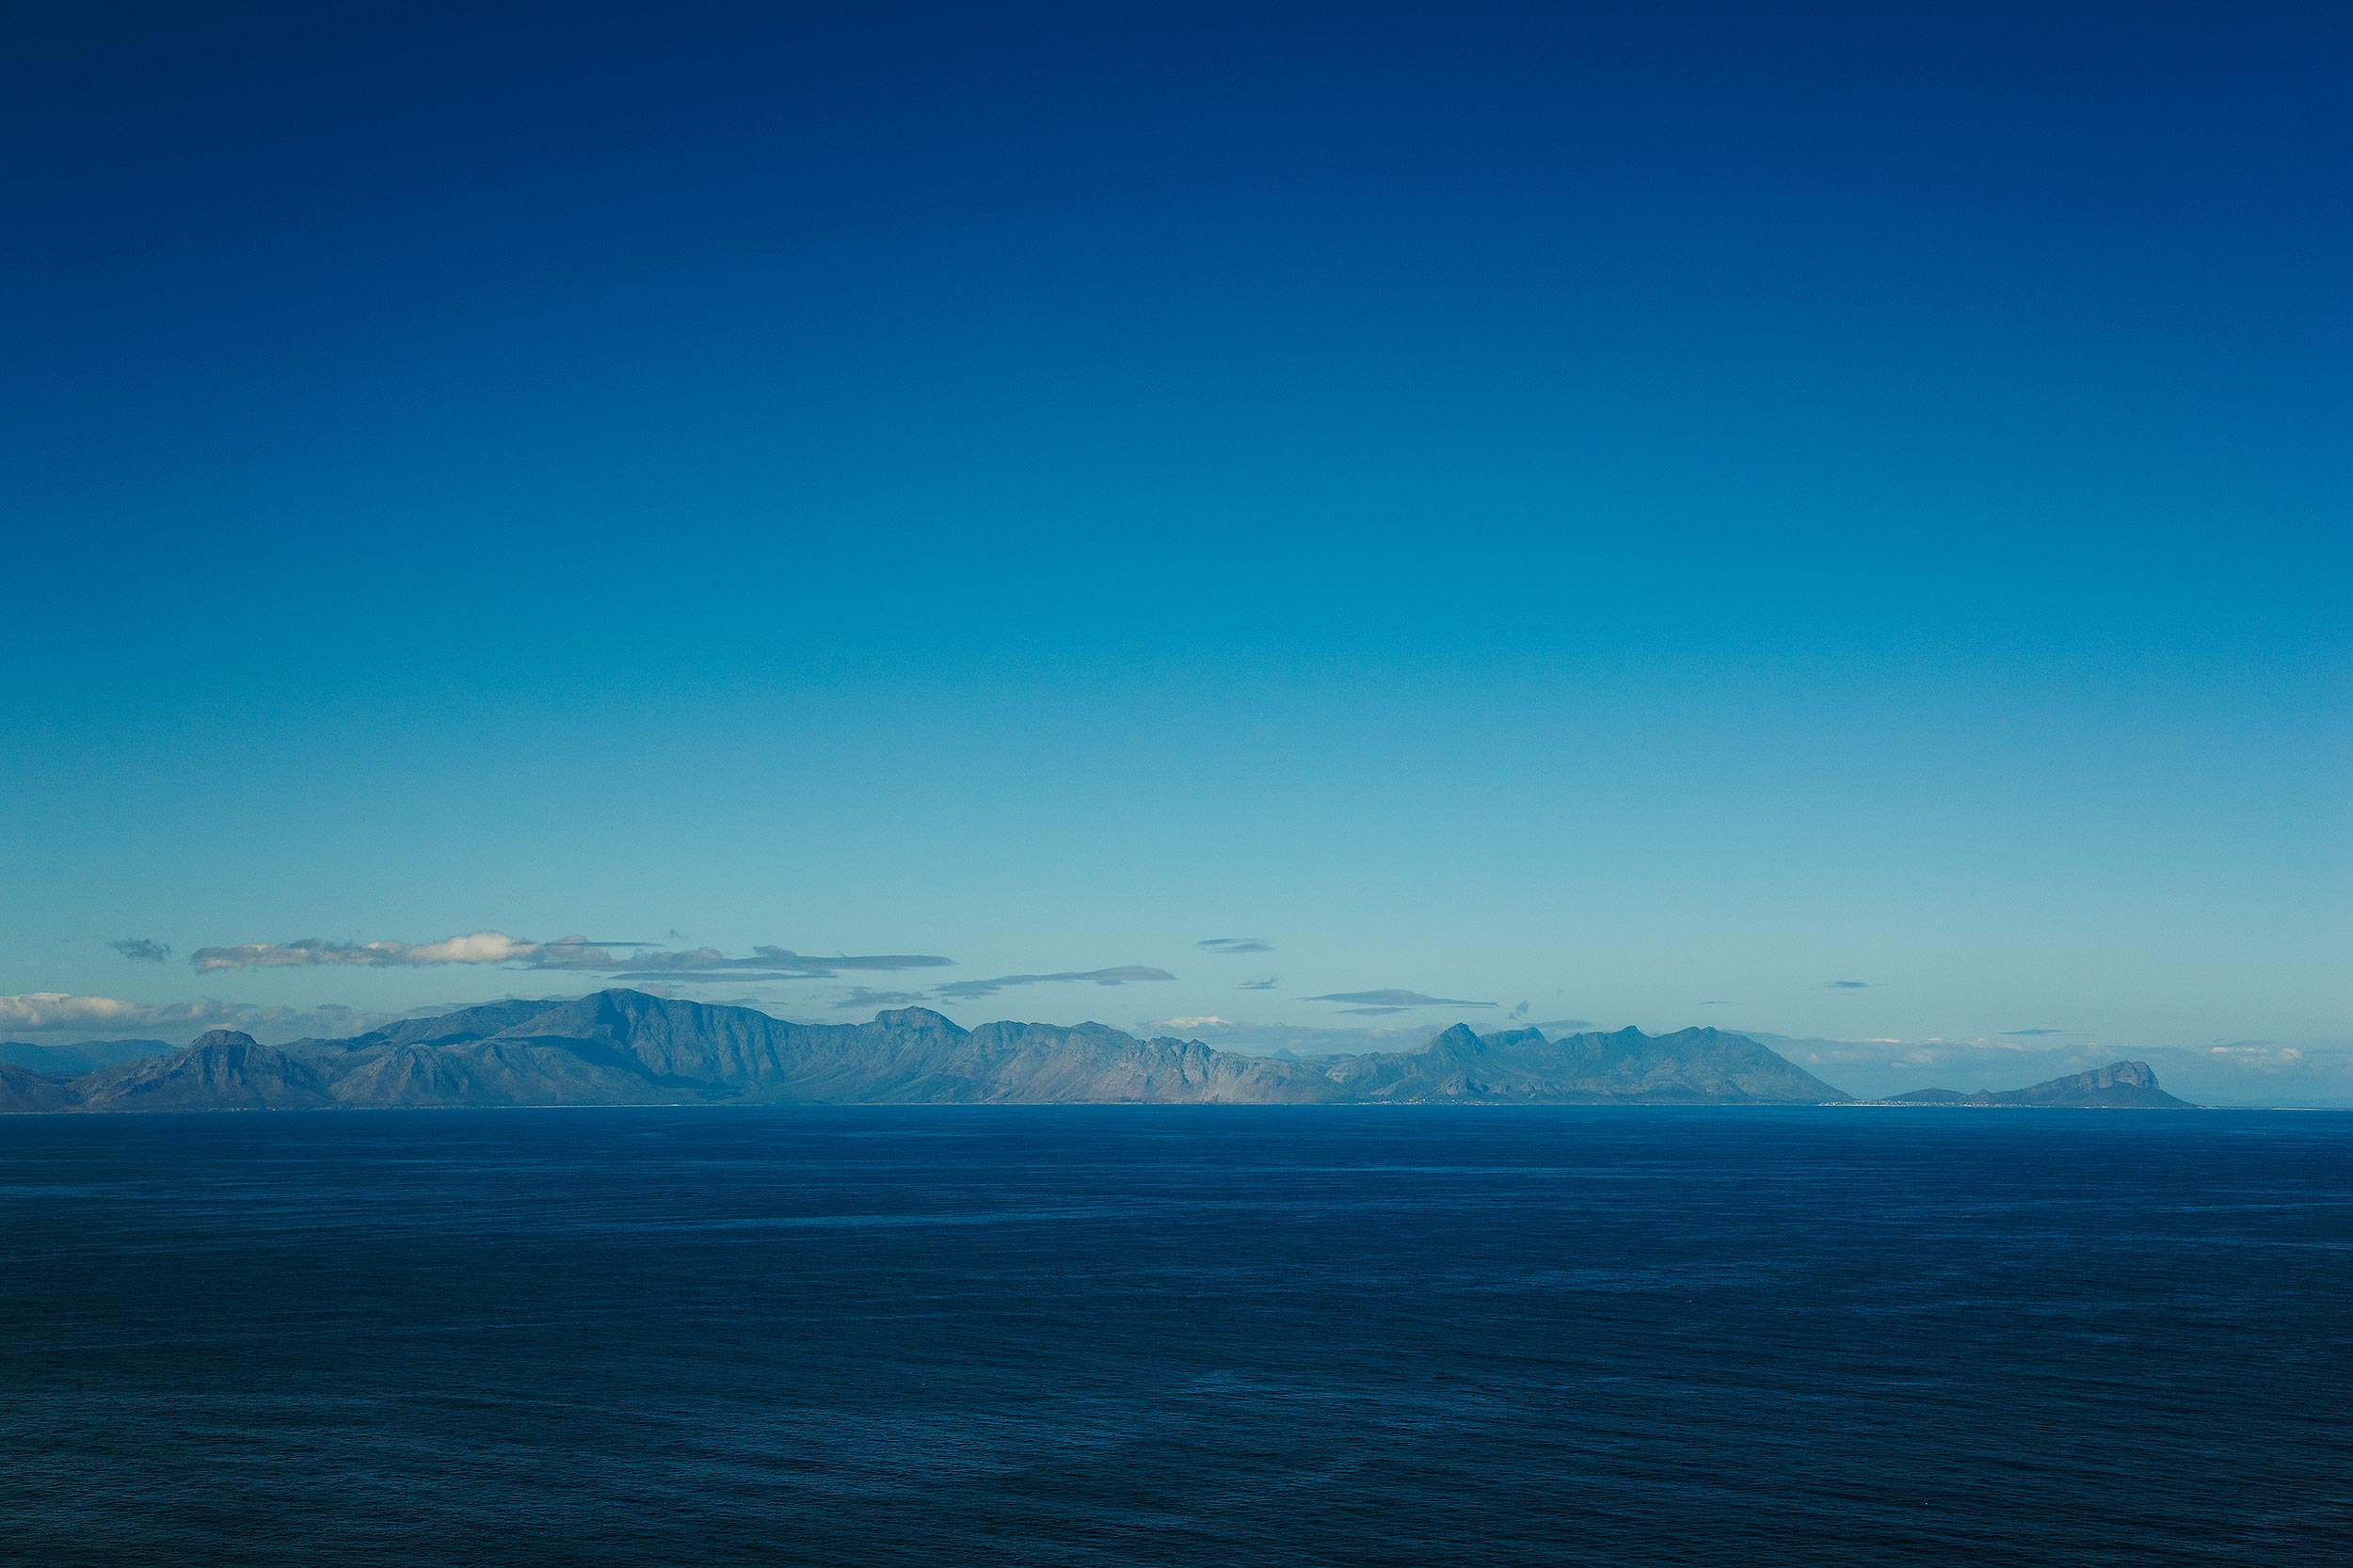 View to Capetown, South Africa.  Landscape photography by Mike Caldwell